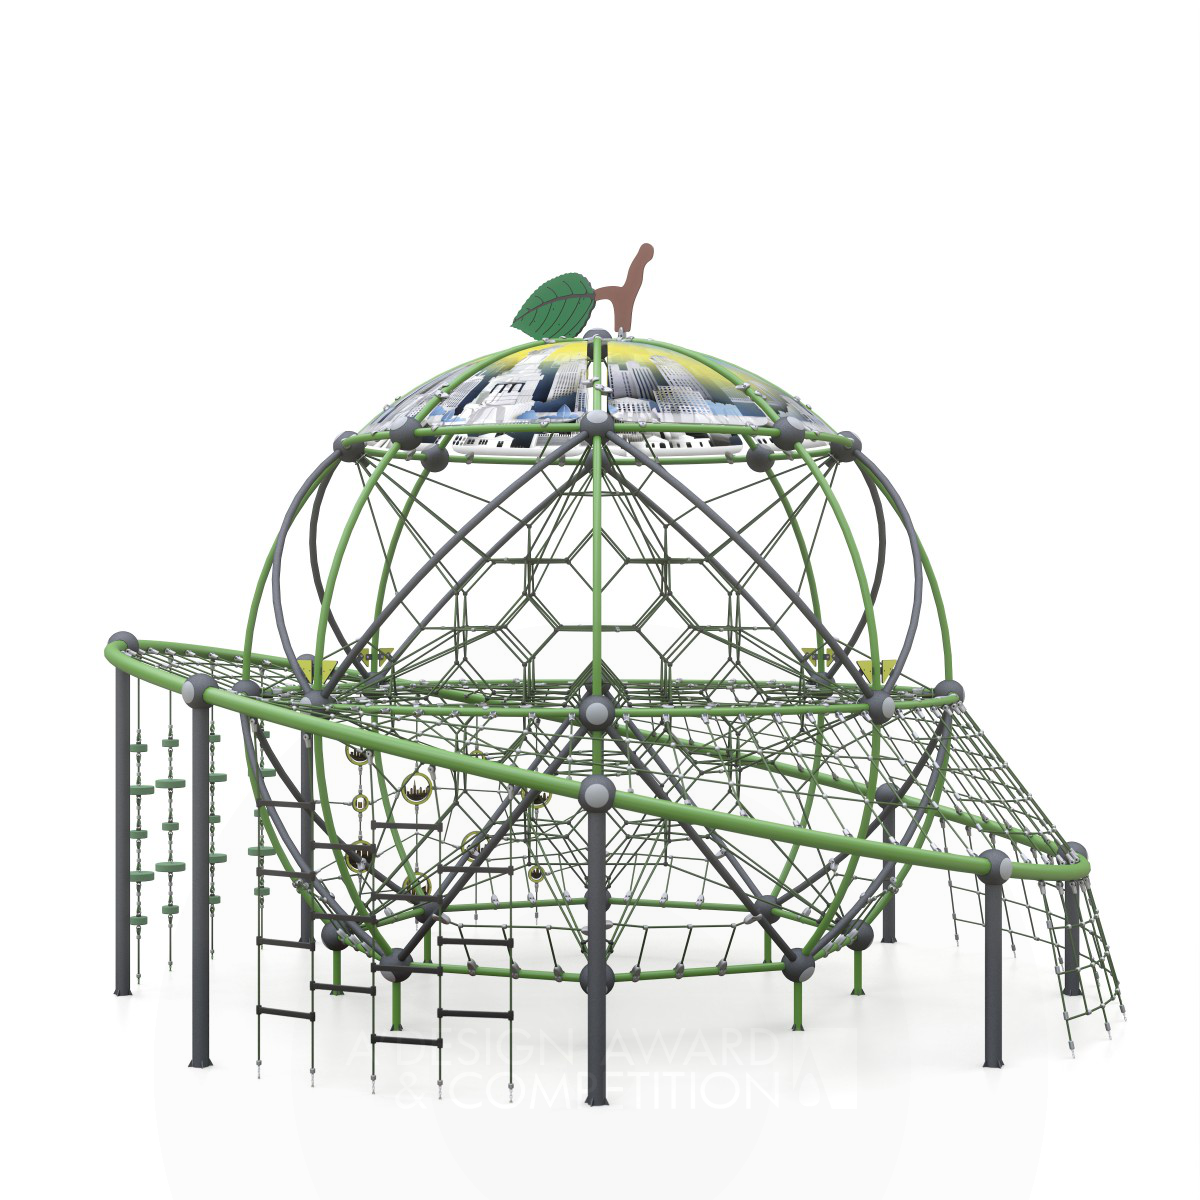 New York Play Unit  by Cemer Design Center Iron Playground Equipment, Play Structures and Public Park Design Award Winner 2024 